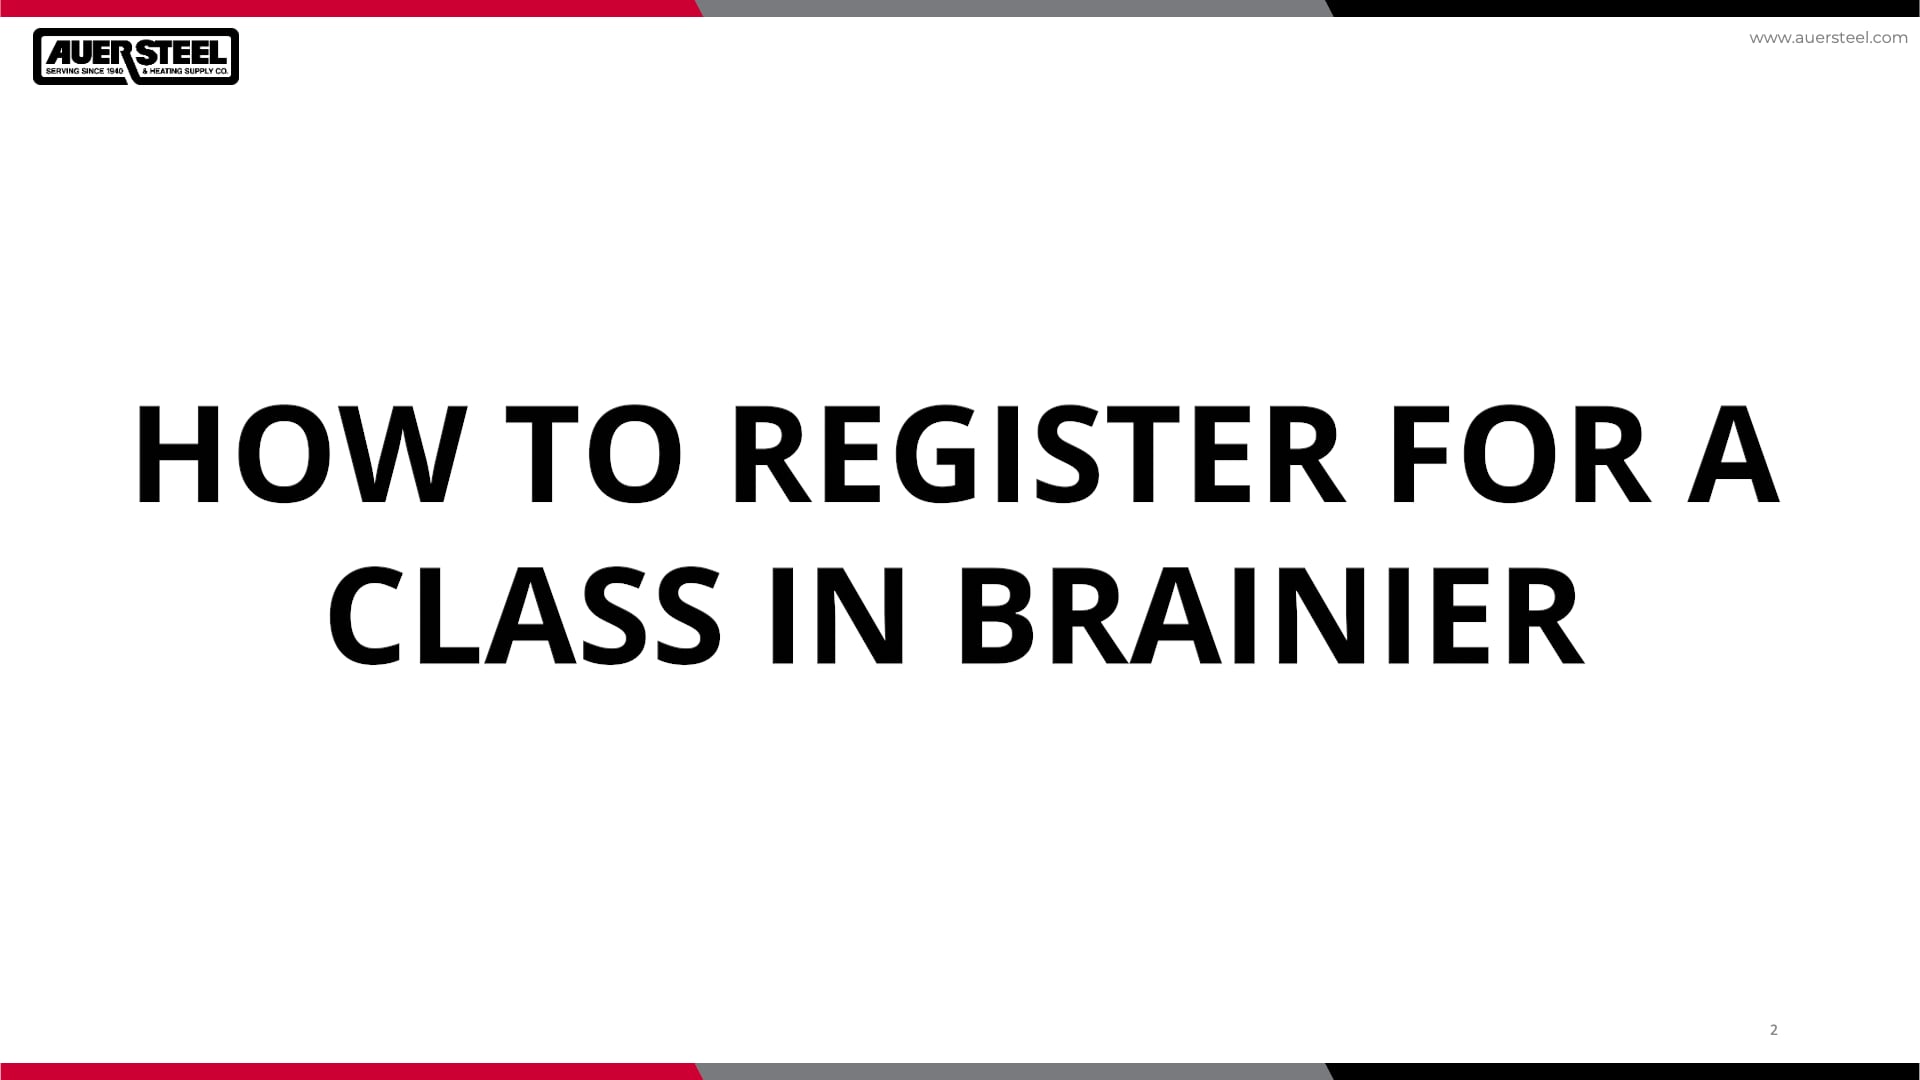 how-to-register-for-a-class-on-vimeo